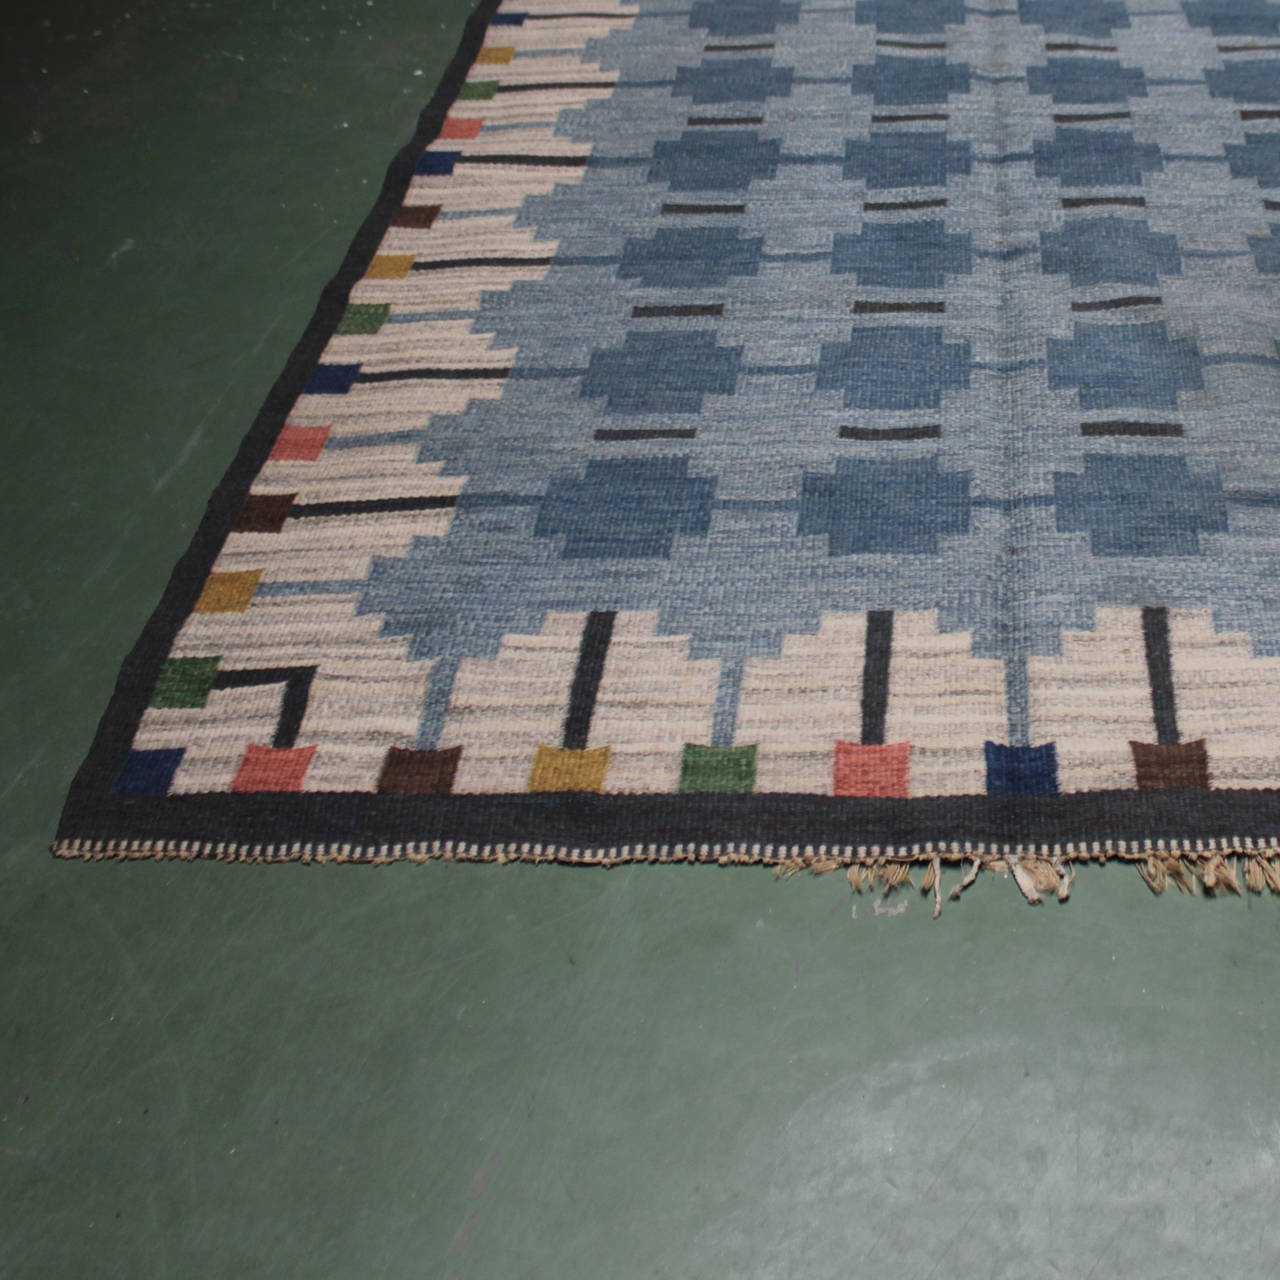 Vintage Swedish woolen flat-weave 'Kilim' signed by Ingegerd Silow (1916-2005). Measurements: 116.9 in. x 79.1 inches (297 cm x 201 cm). Woven initials. Wear of age at the fringe. This rug is never washed or cleaned, some small spots, maybe rust